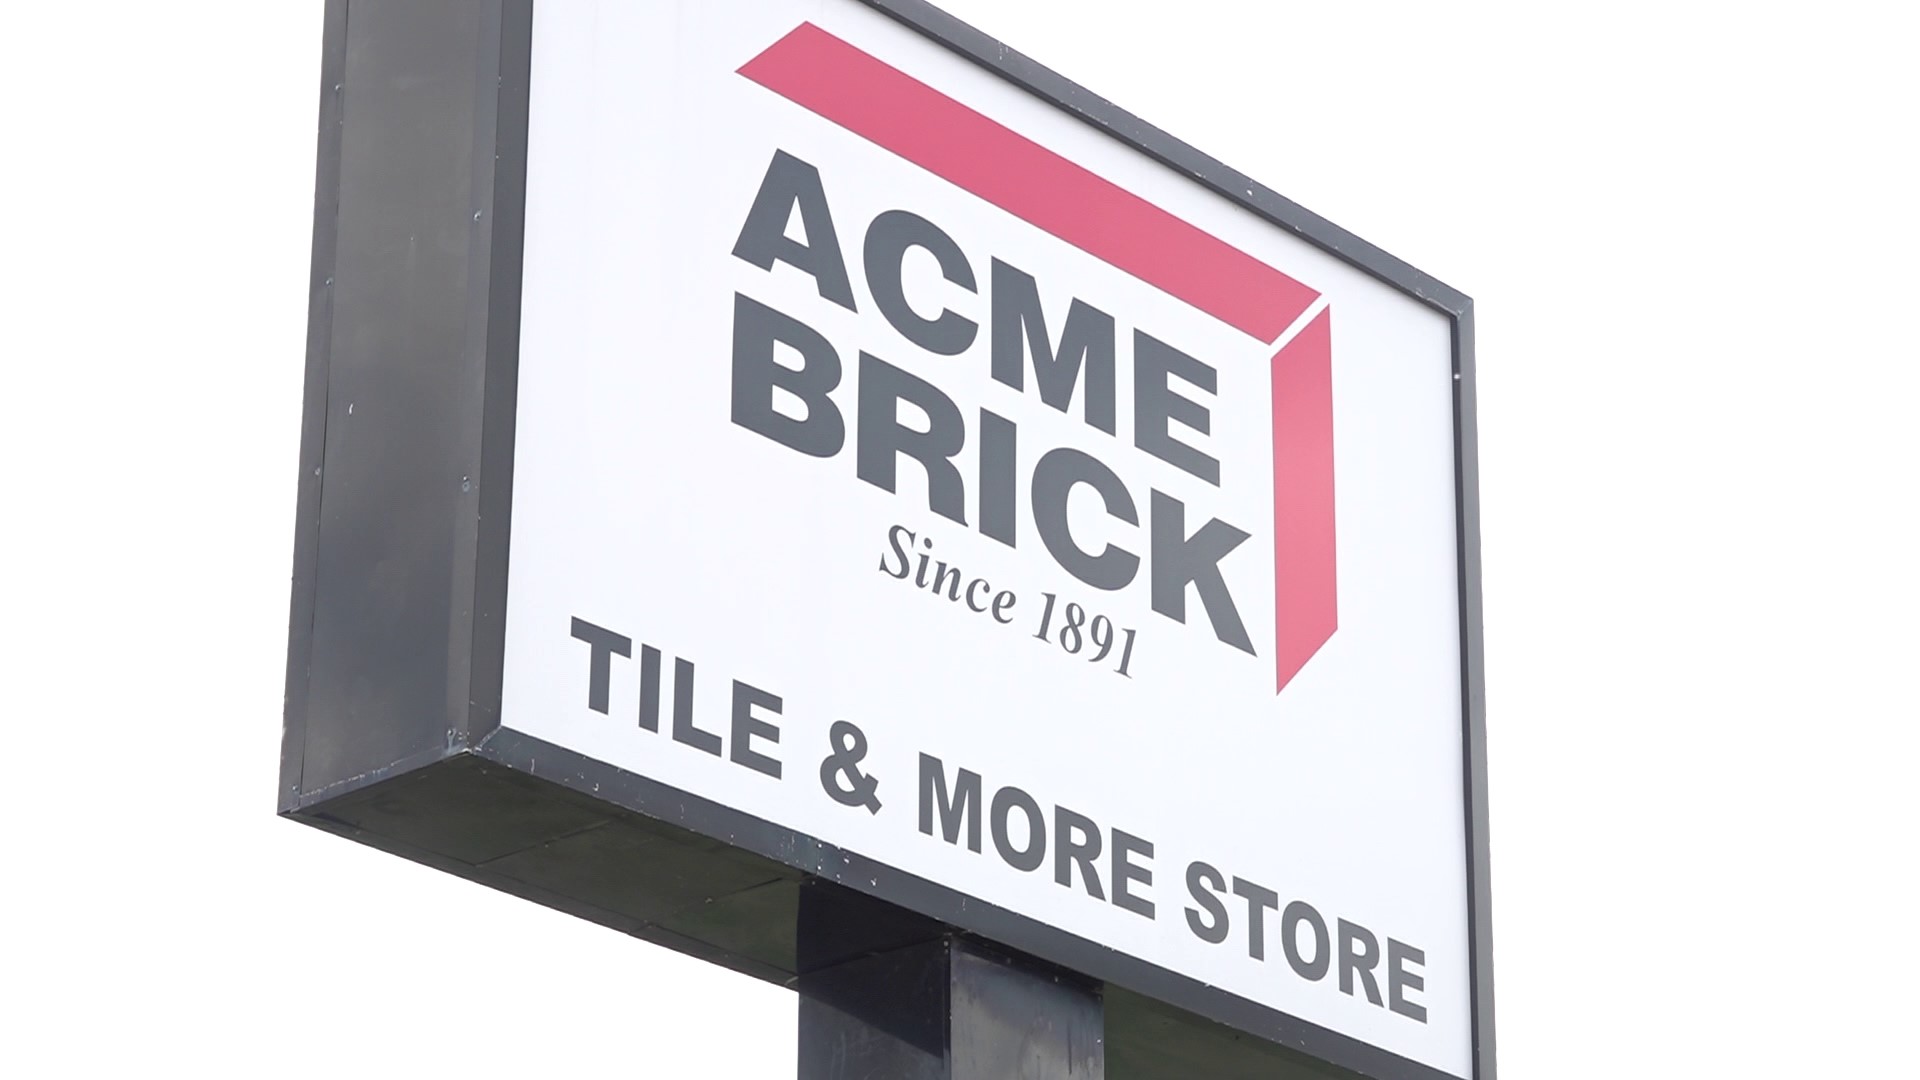 Acme Brick merged with the Fort Smith Brick Company in 1923, and 100 years later a group is proposing the city purchase and repurpose it into Brick Yard Park.